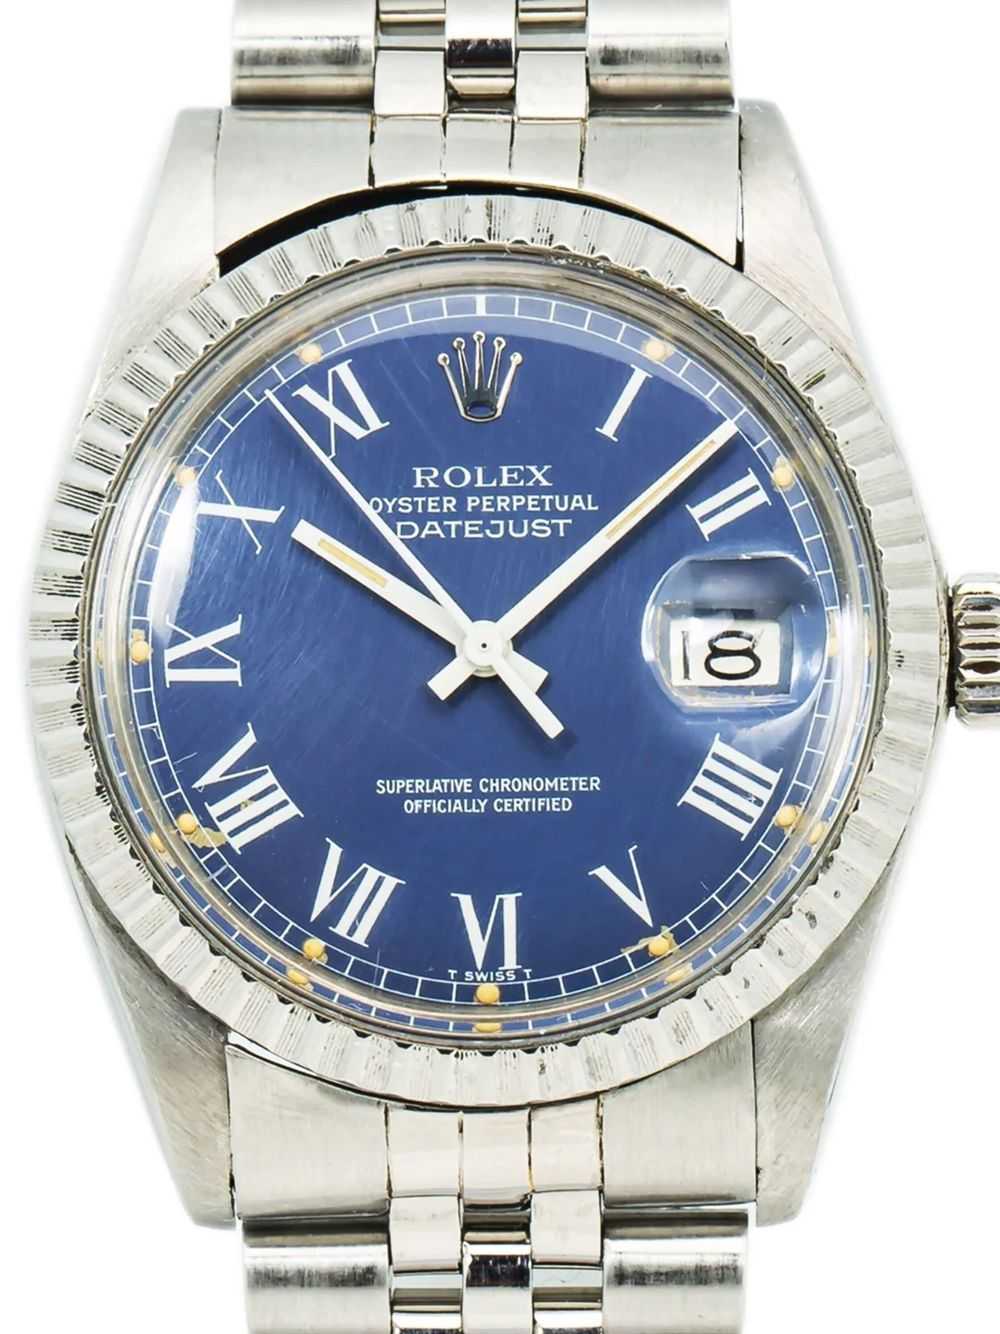 Rolex pre-owned Datejust 36mm - Blue - image 2